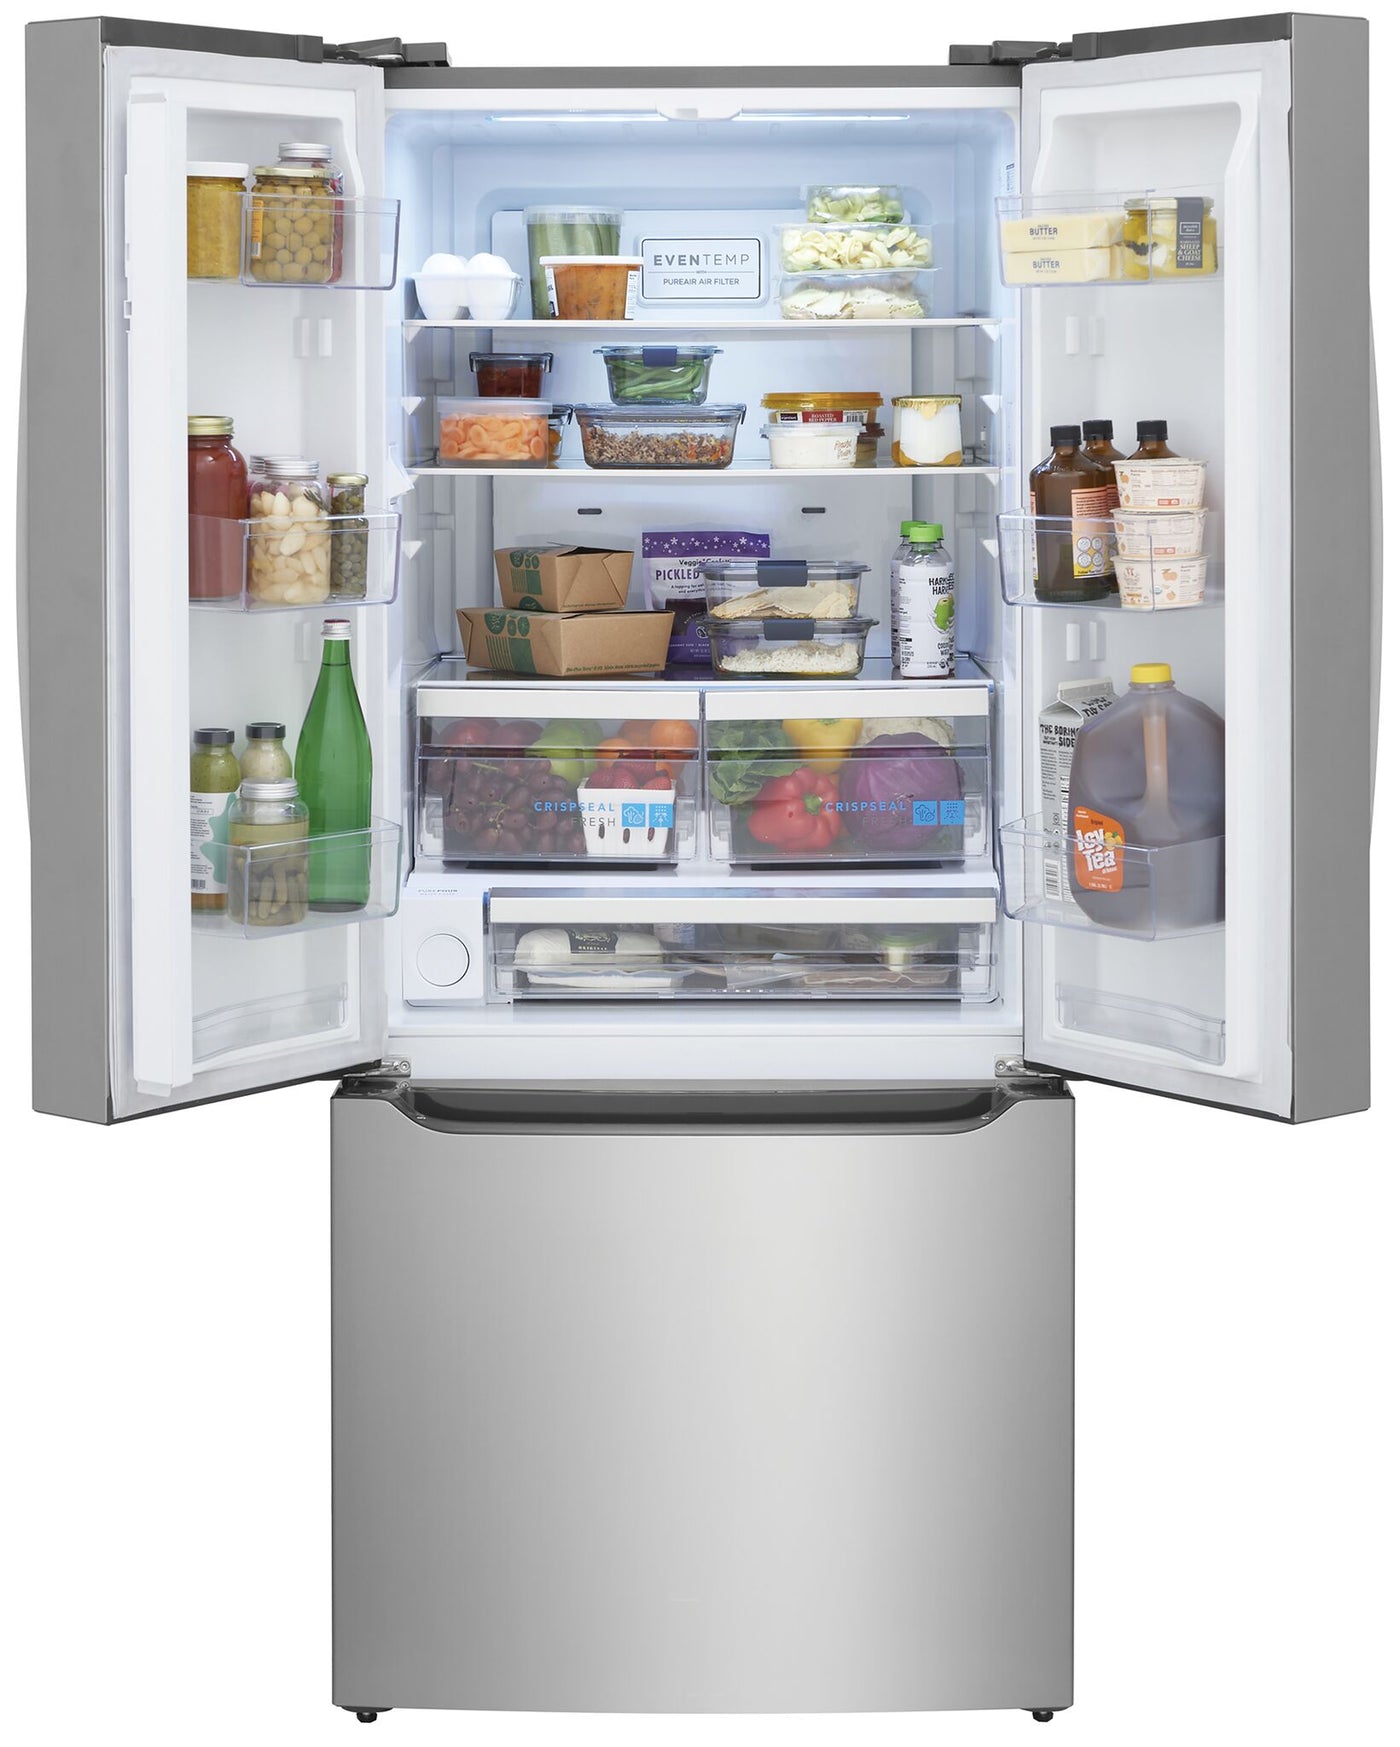 Frigidaire Gallery Smudge-Proof® Stainless Steel French Door Refrigerator (20 Cu. Ft.) - GRFN2023AF